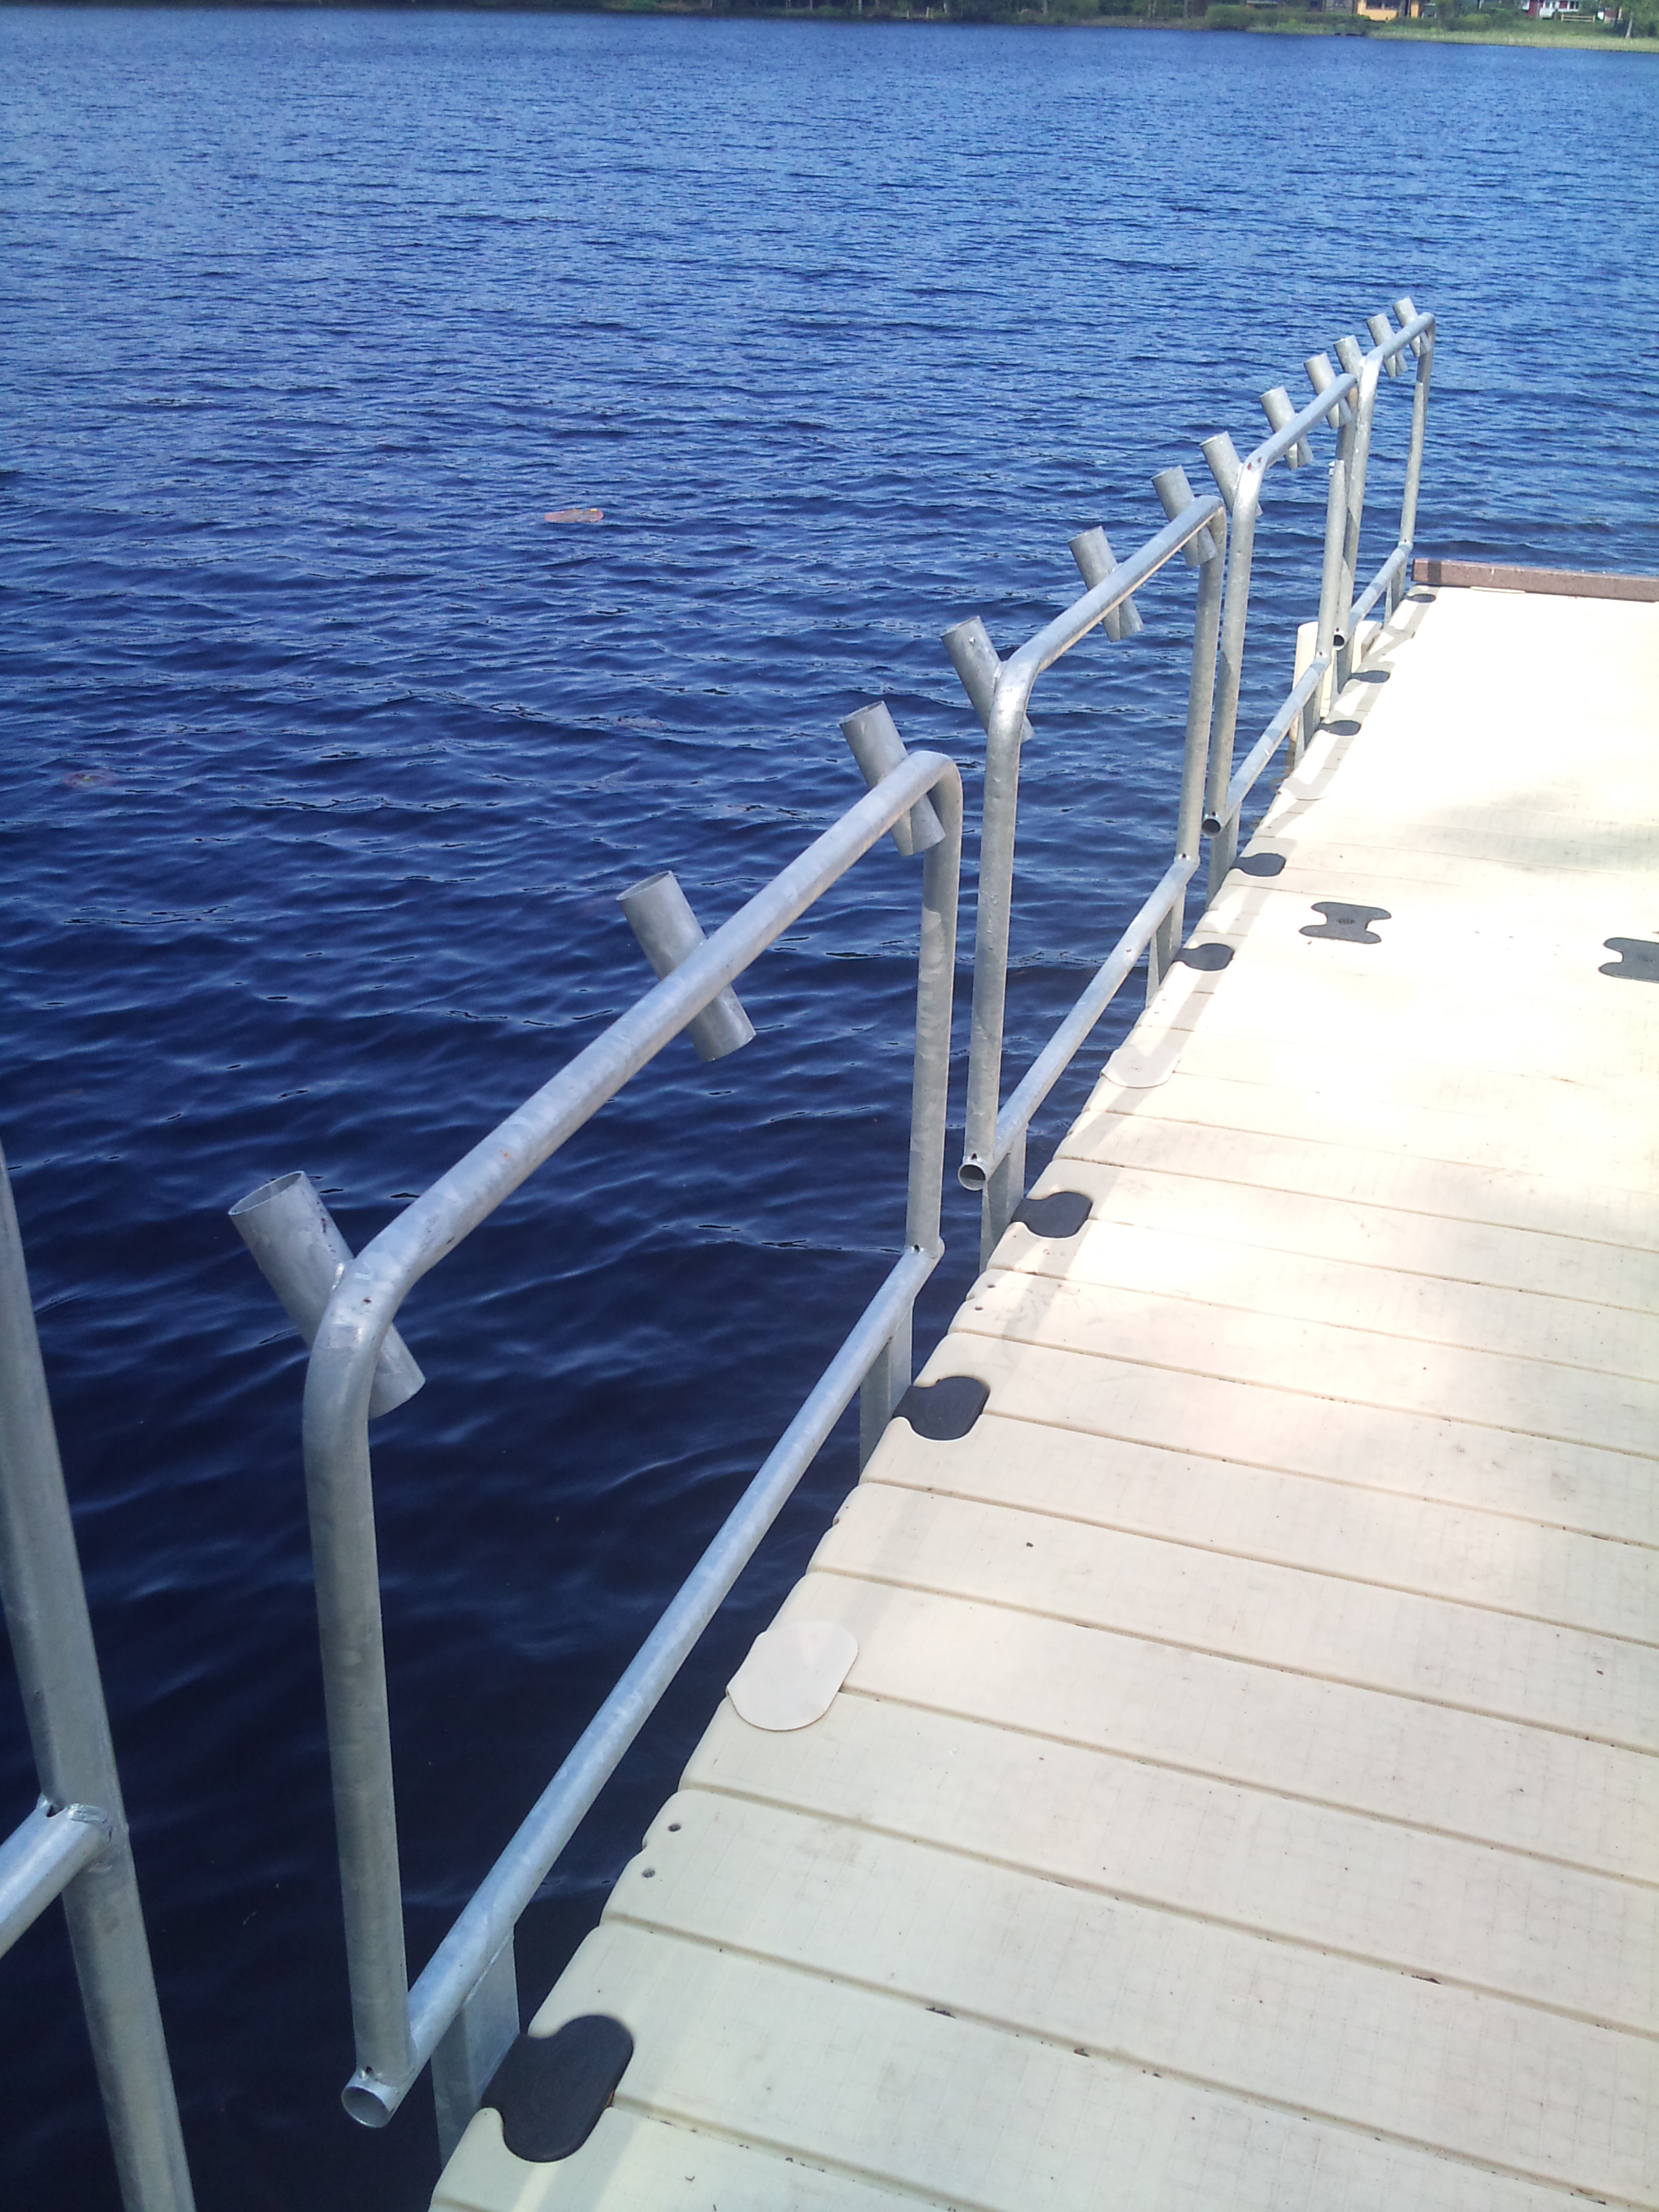 5' rail with pole holders